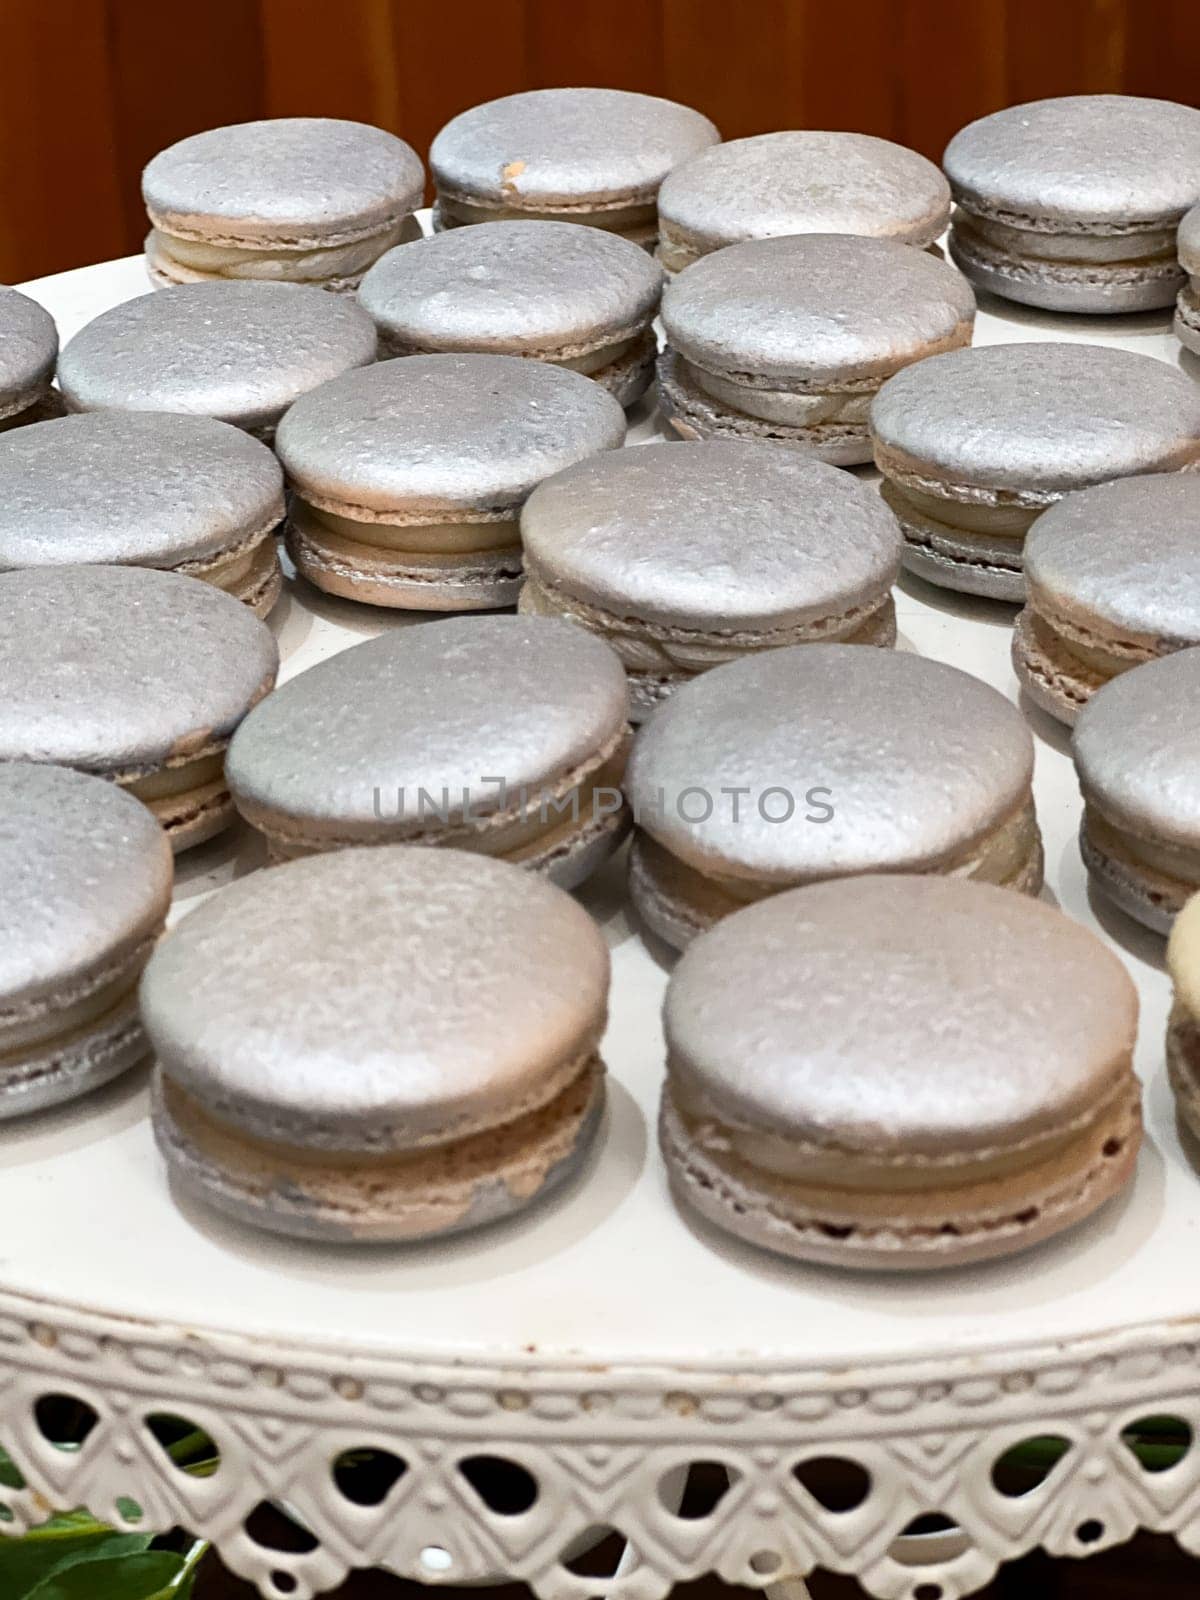 Silver French Macarons at Wedding Reception by joshuaraineyphotography